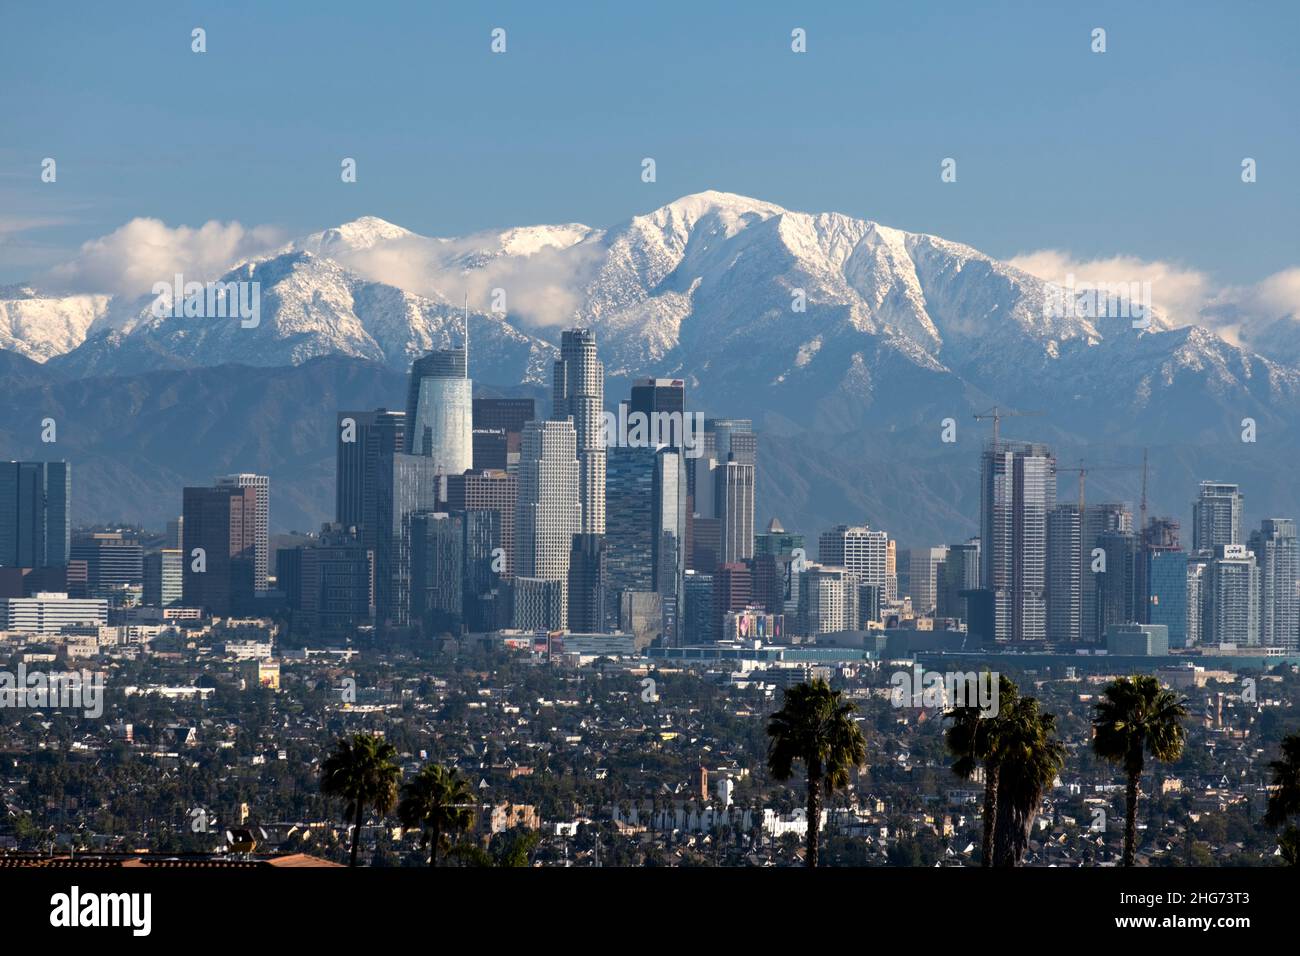 Skyline of downtown Los Angeles on a clear day with the San Gabriel Mountains and Mt. Baldy covered in snow Stock Photo